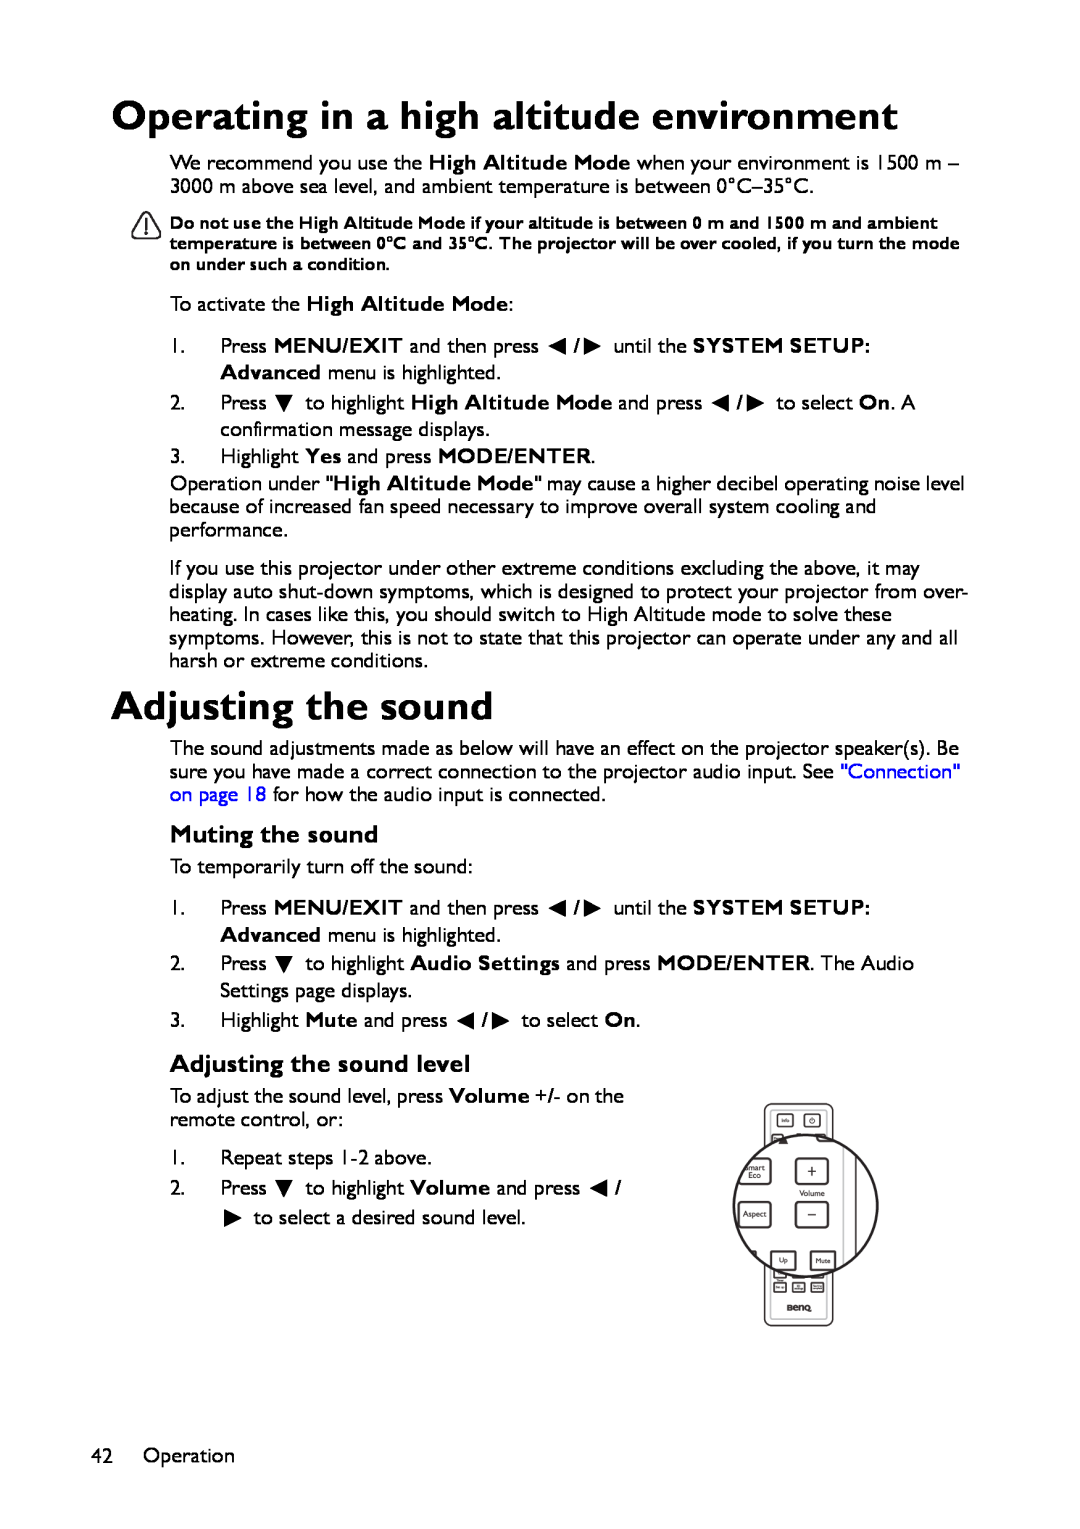 BenQ MS521 user manual Operating in a high altitude environment, Muting the sound, Adjusting the sound level 